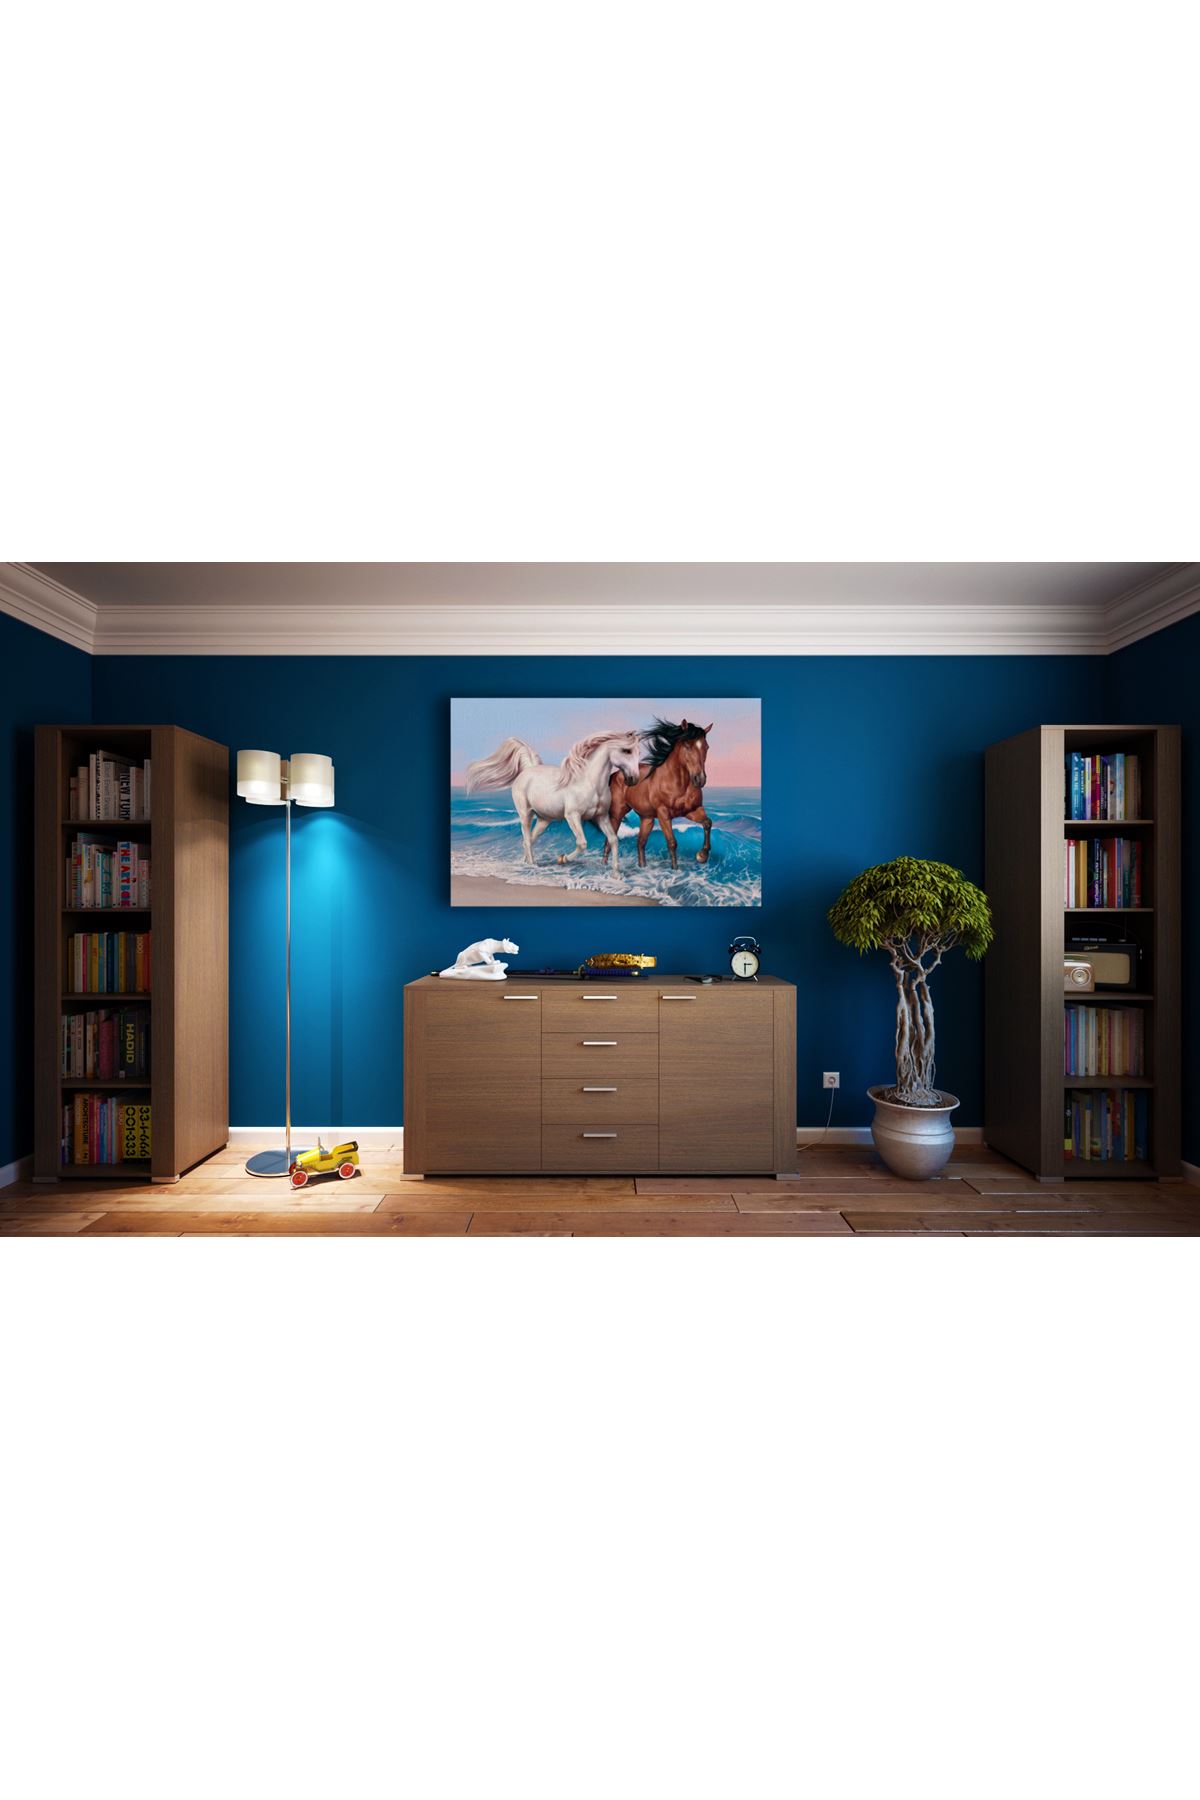 Horse's and Sea Canvas 